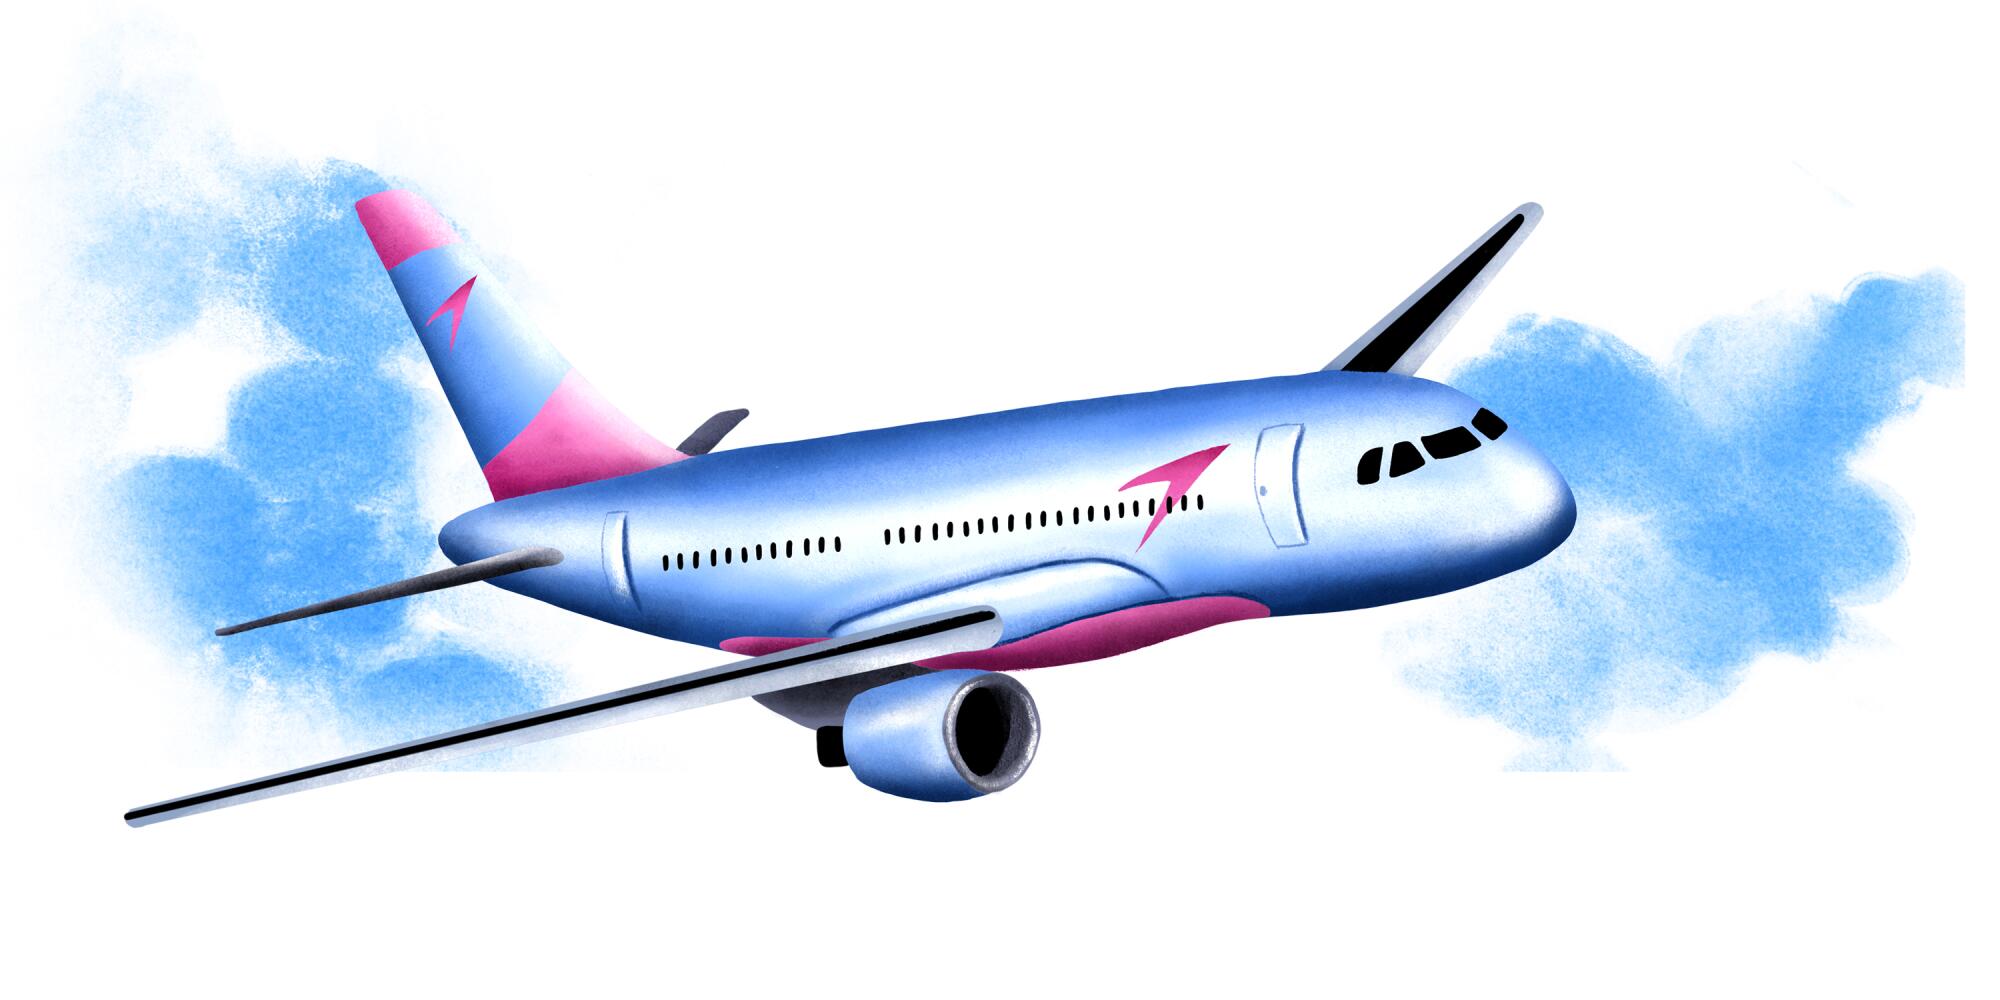 Illustration of an airplane